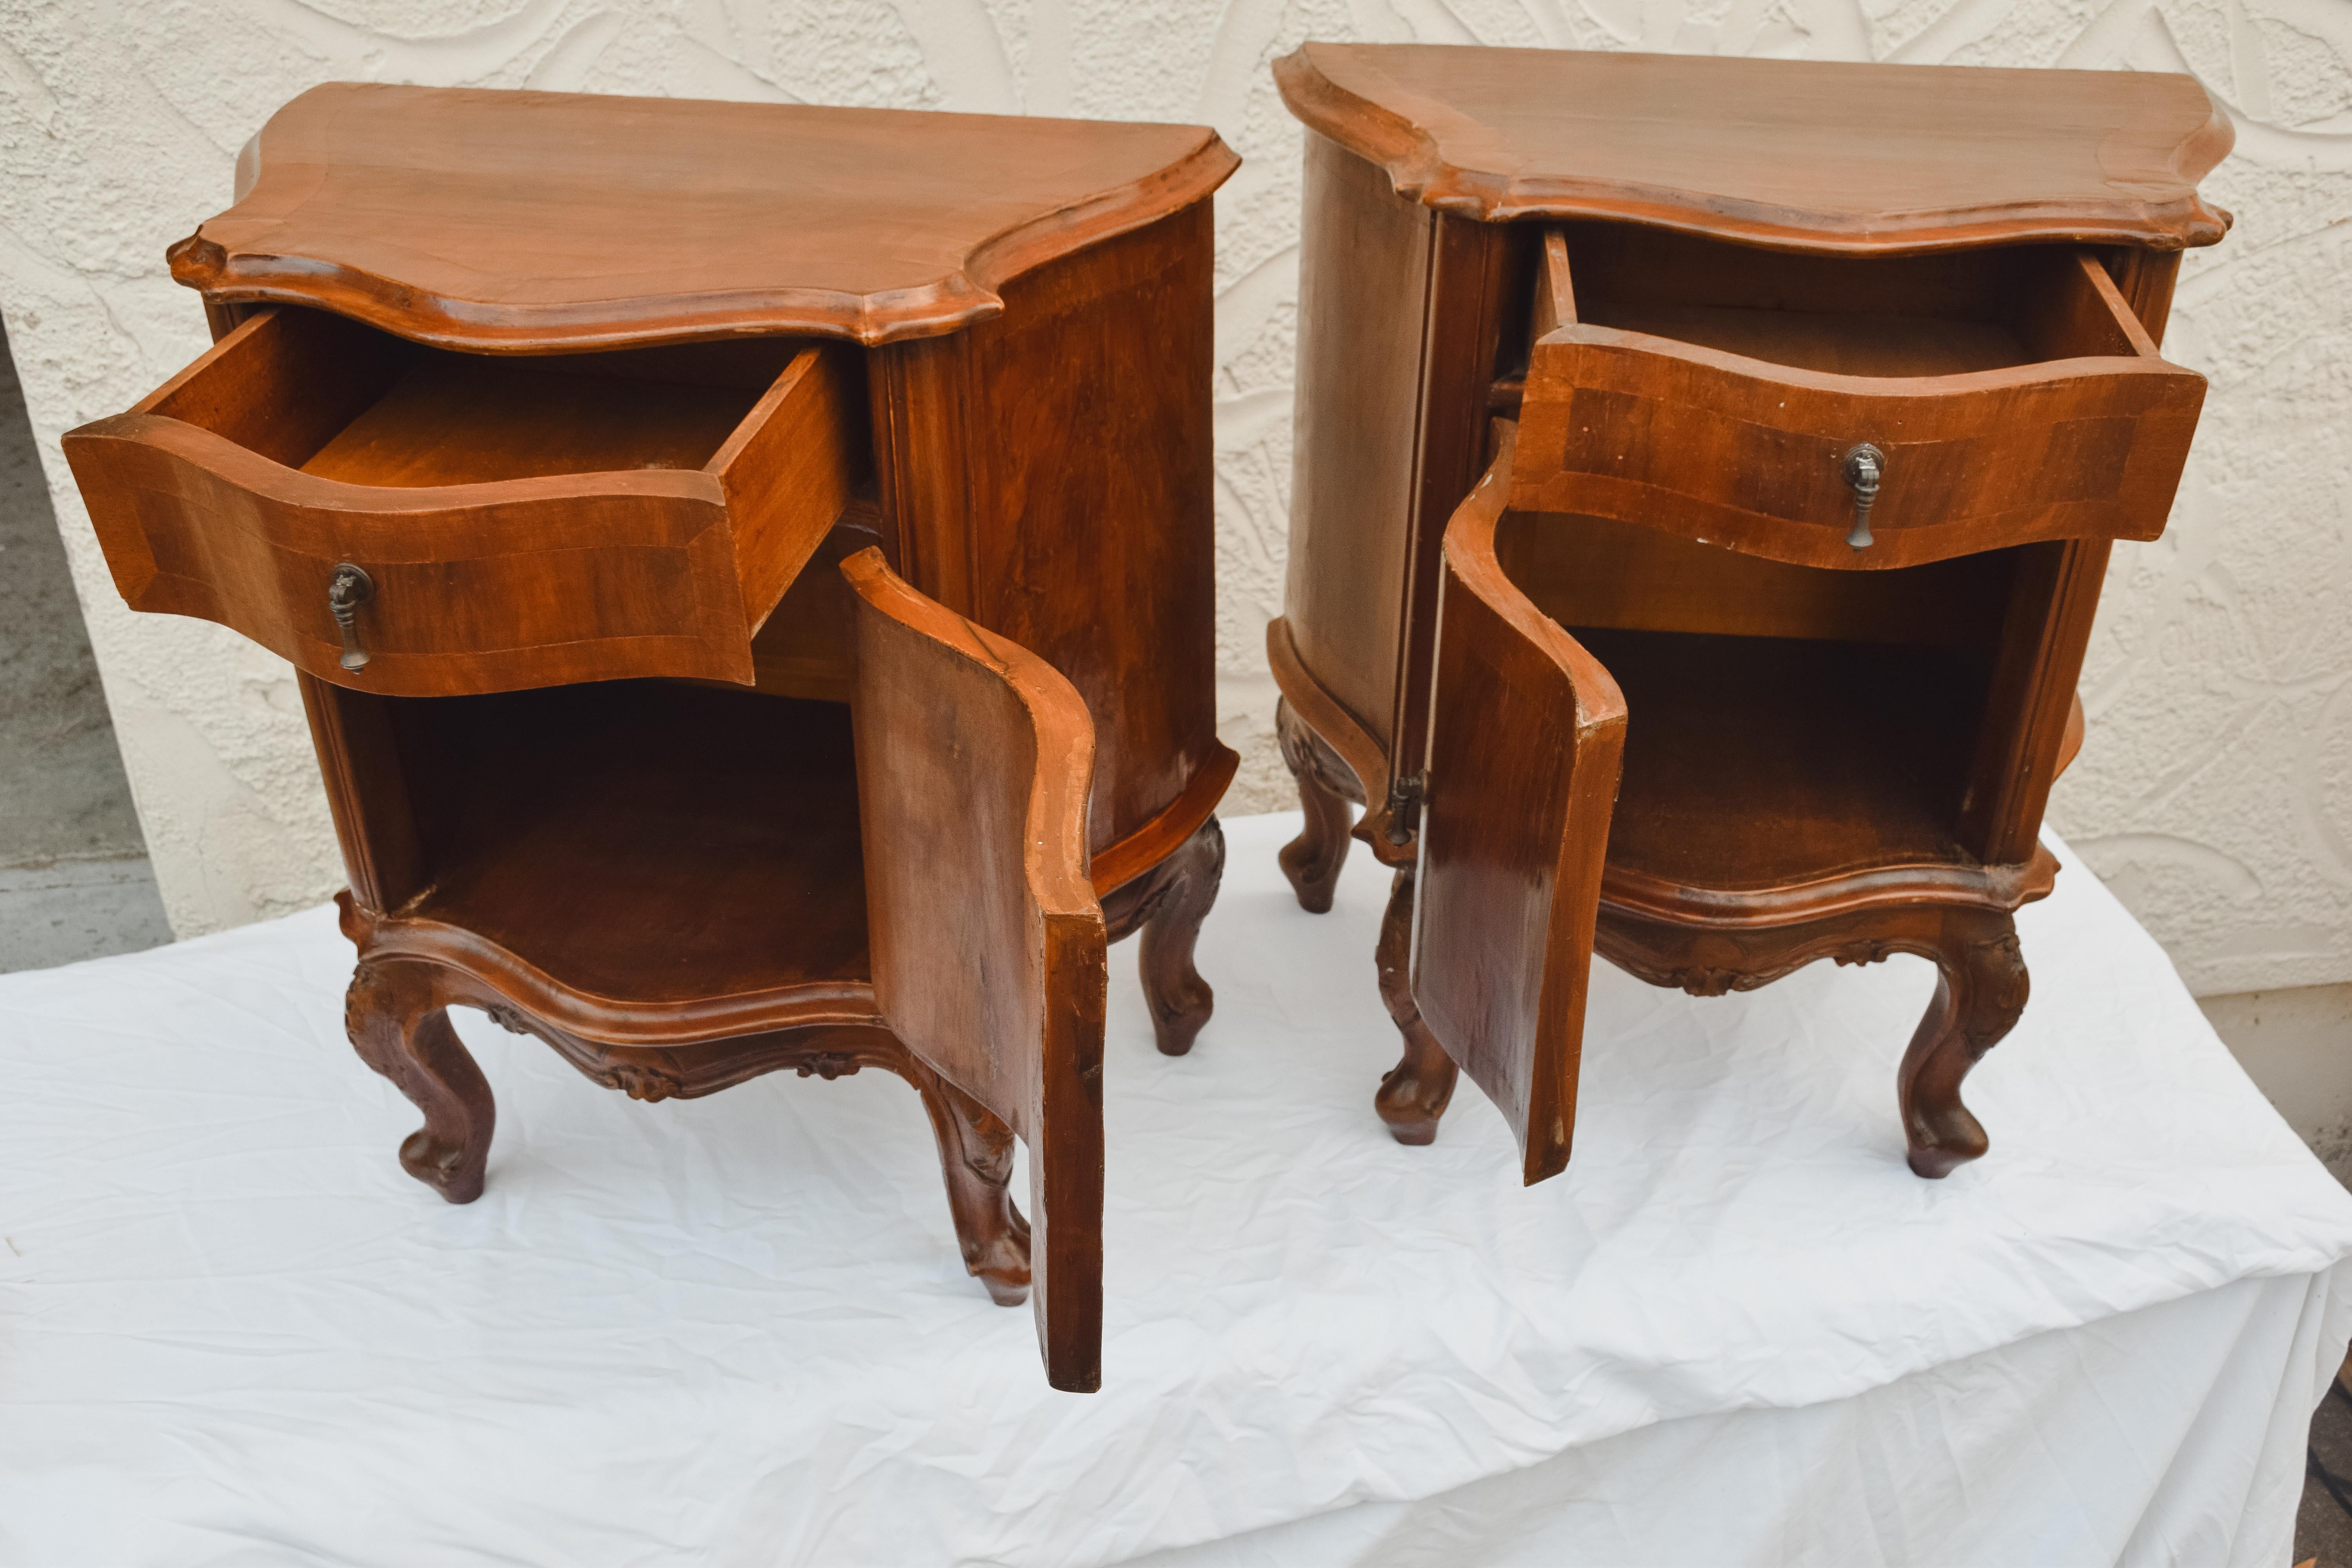 Pair of Mid Century Italian bedside tables. Wavy and rounded furniture in walnut and beech woods with beautiful lines. Bedside tables with one door of good capacity and a functional drawer. On the smaller size for typical American decor but nicely